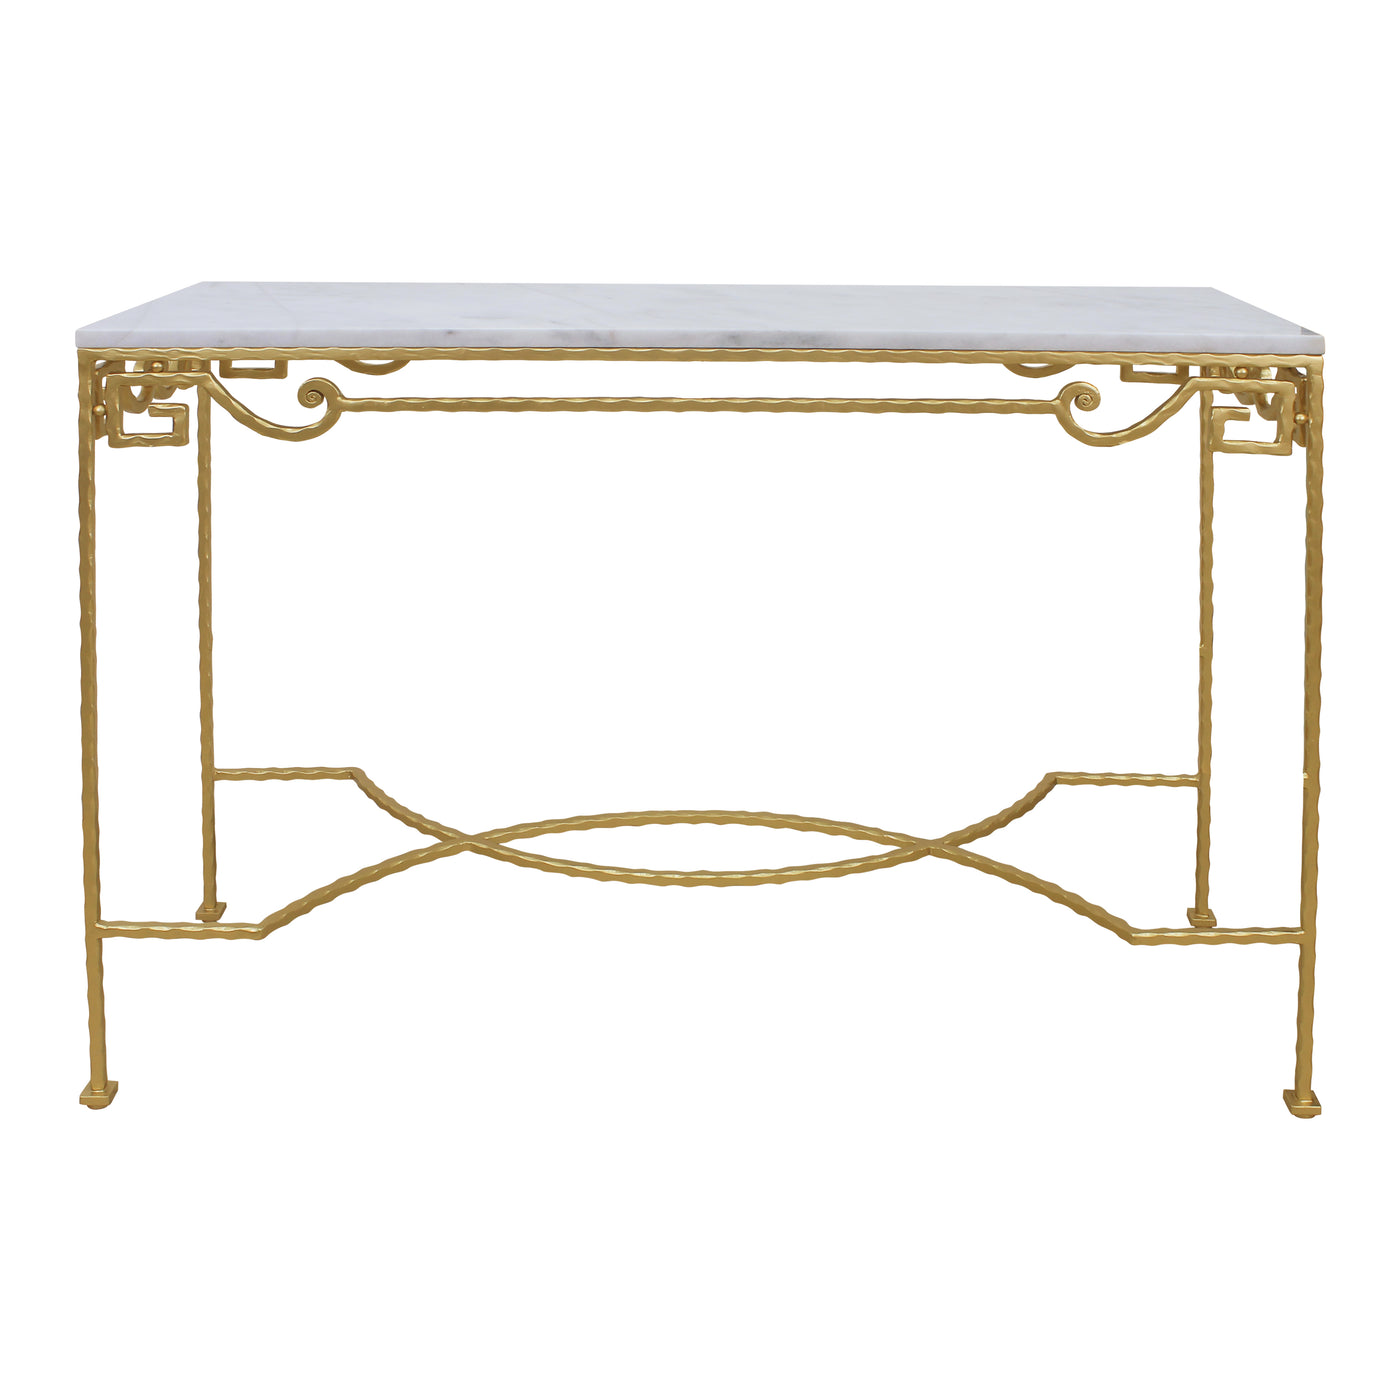 Simple wrought iron rectangular console table painted in gold and topped with a white natural marble